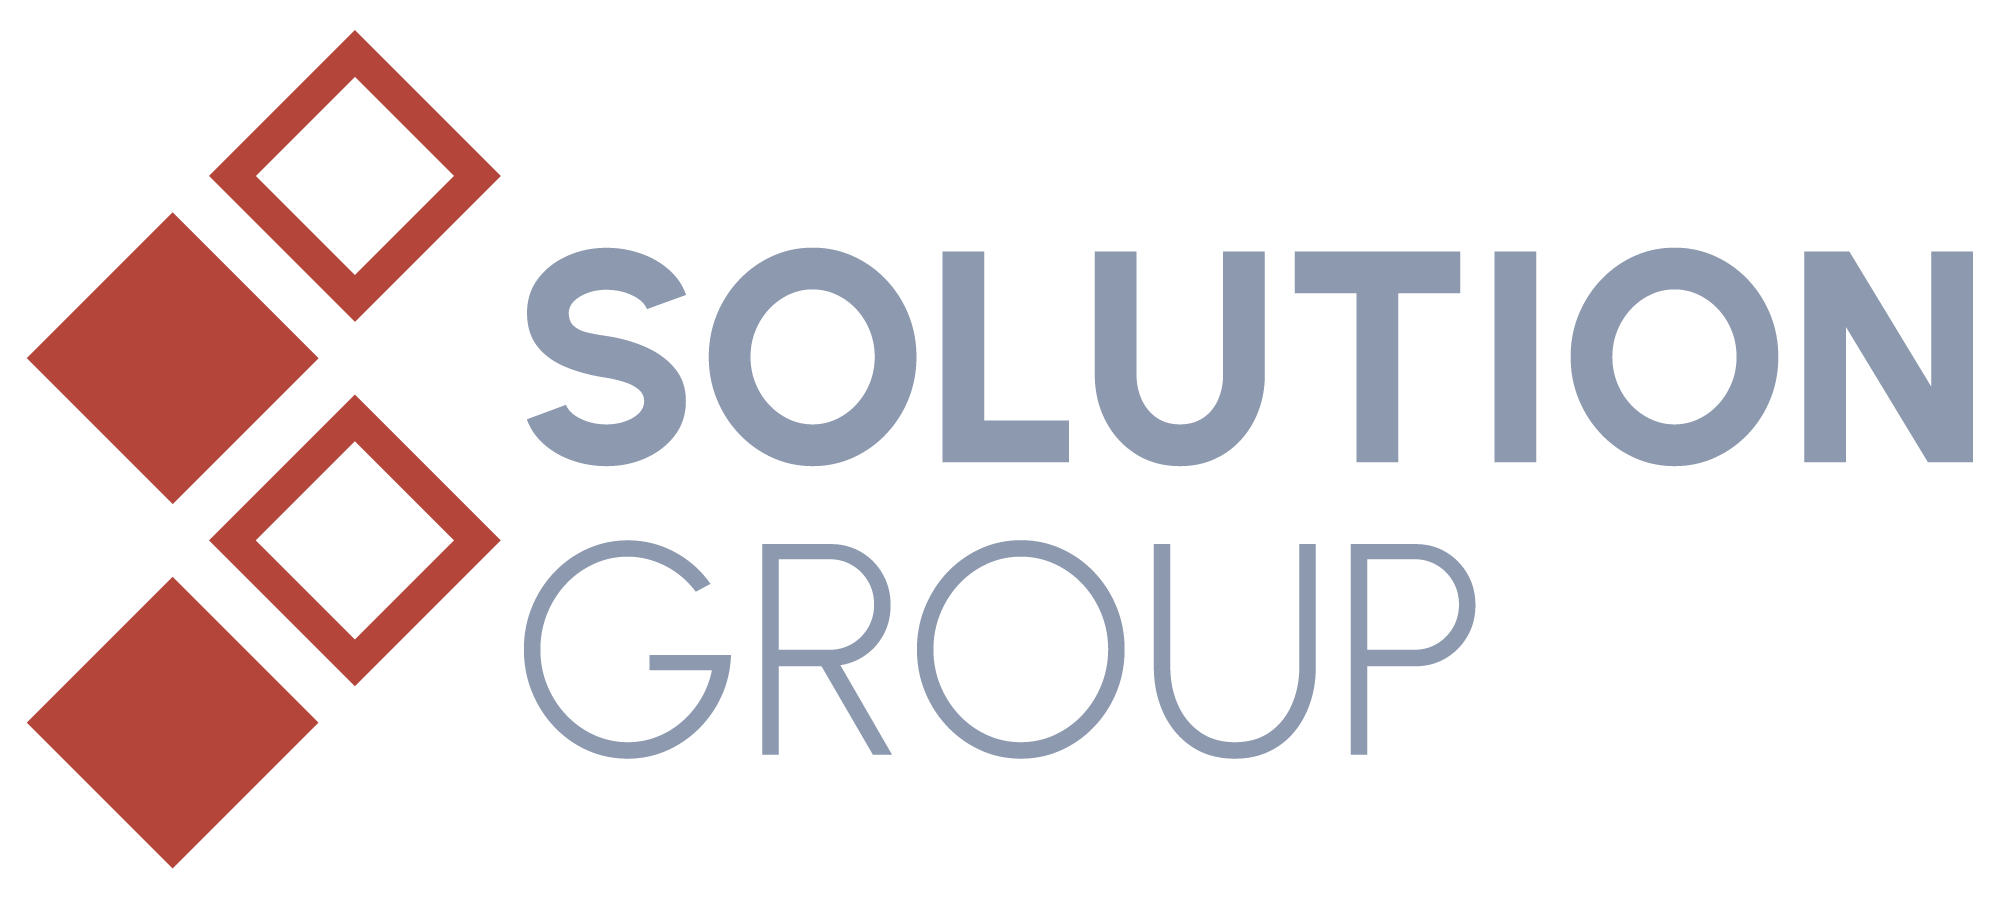 Solution group